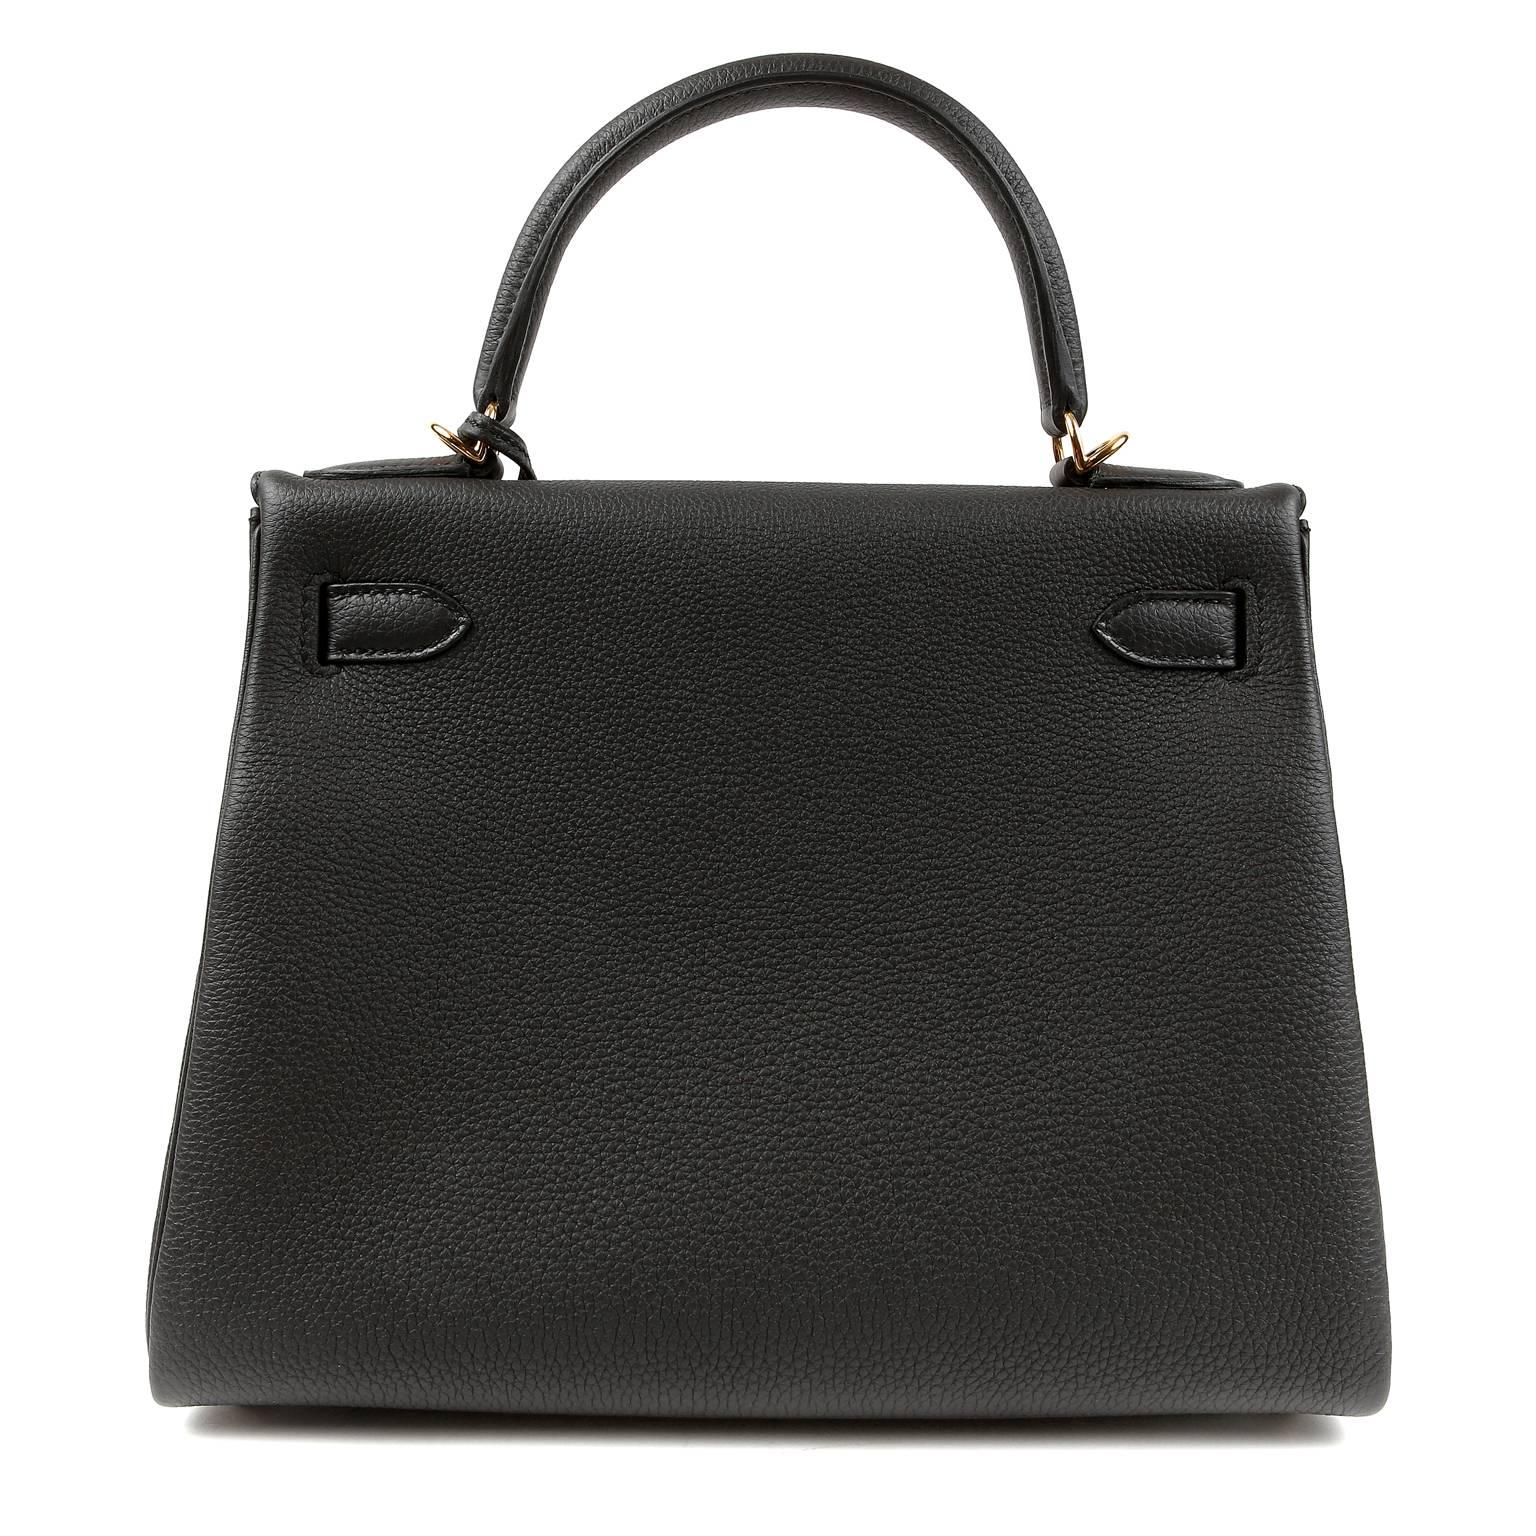  Hermès Black Togo 28 cm Kelly- PRISTINE;  The protective plastic remains intact on the hardware.   Hermès bags are considered the ultimate luxury item worldwide.  Each piece is handcrafted with waitlists that can exceed a year or more.  The